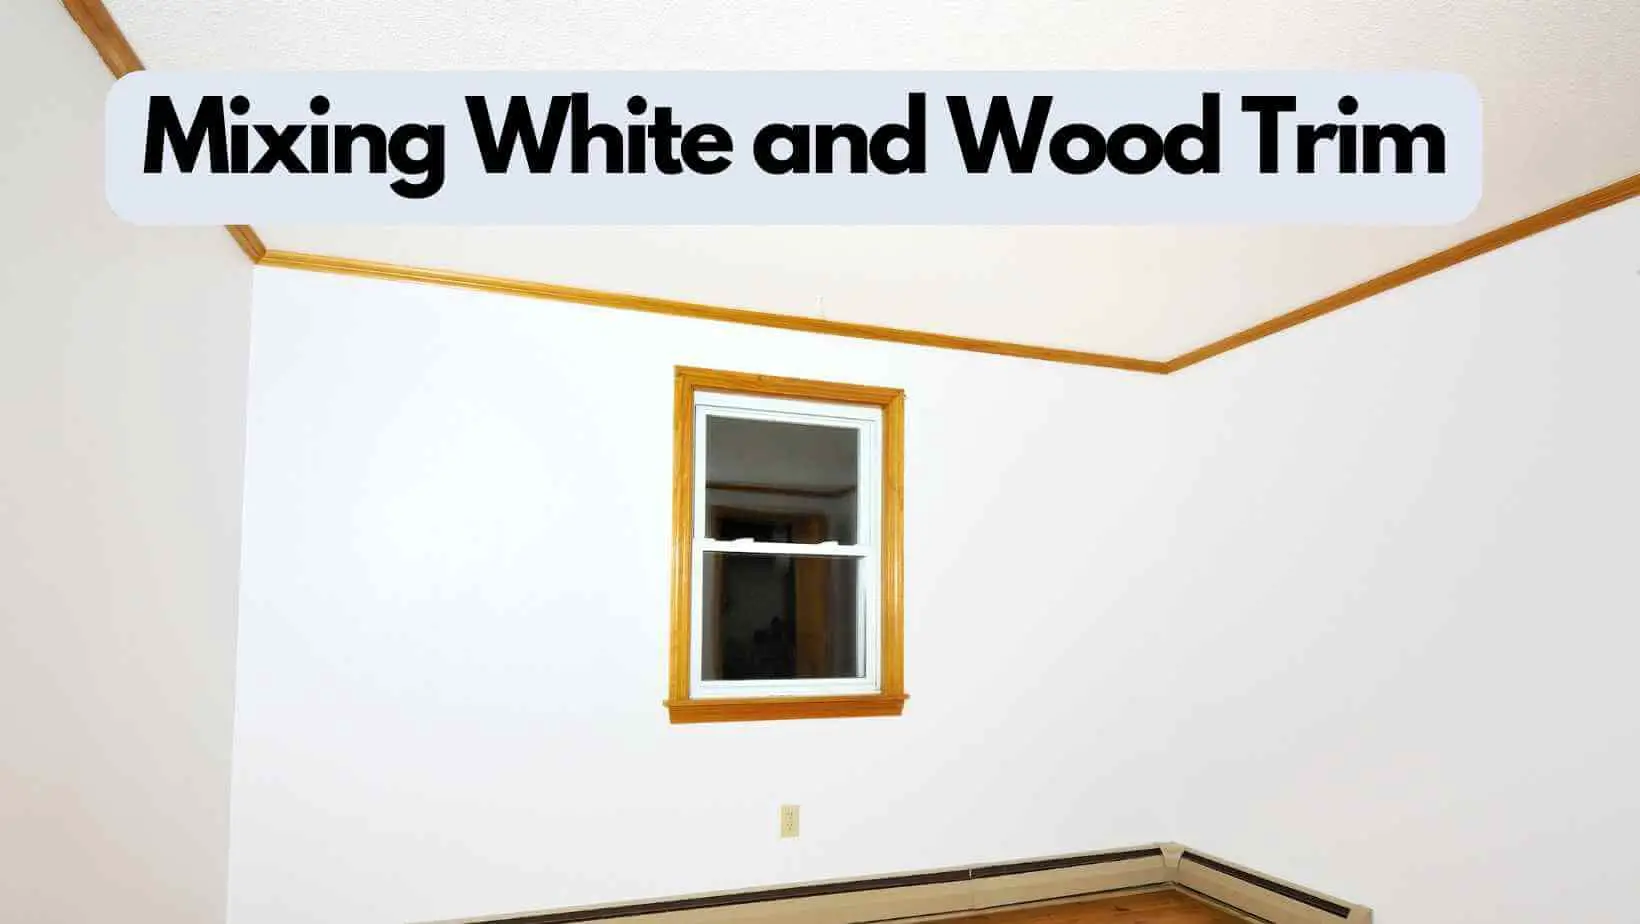 Mixing White and Wood Trim